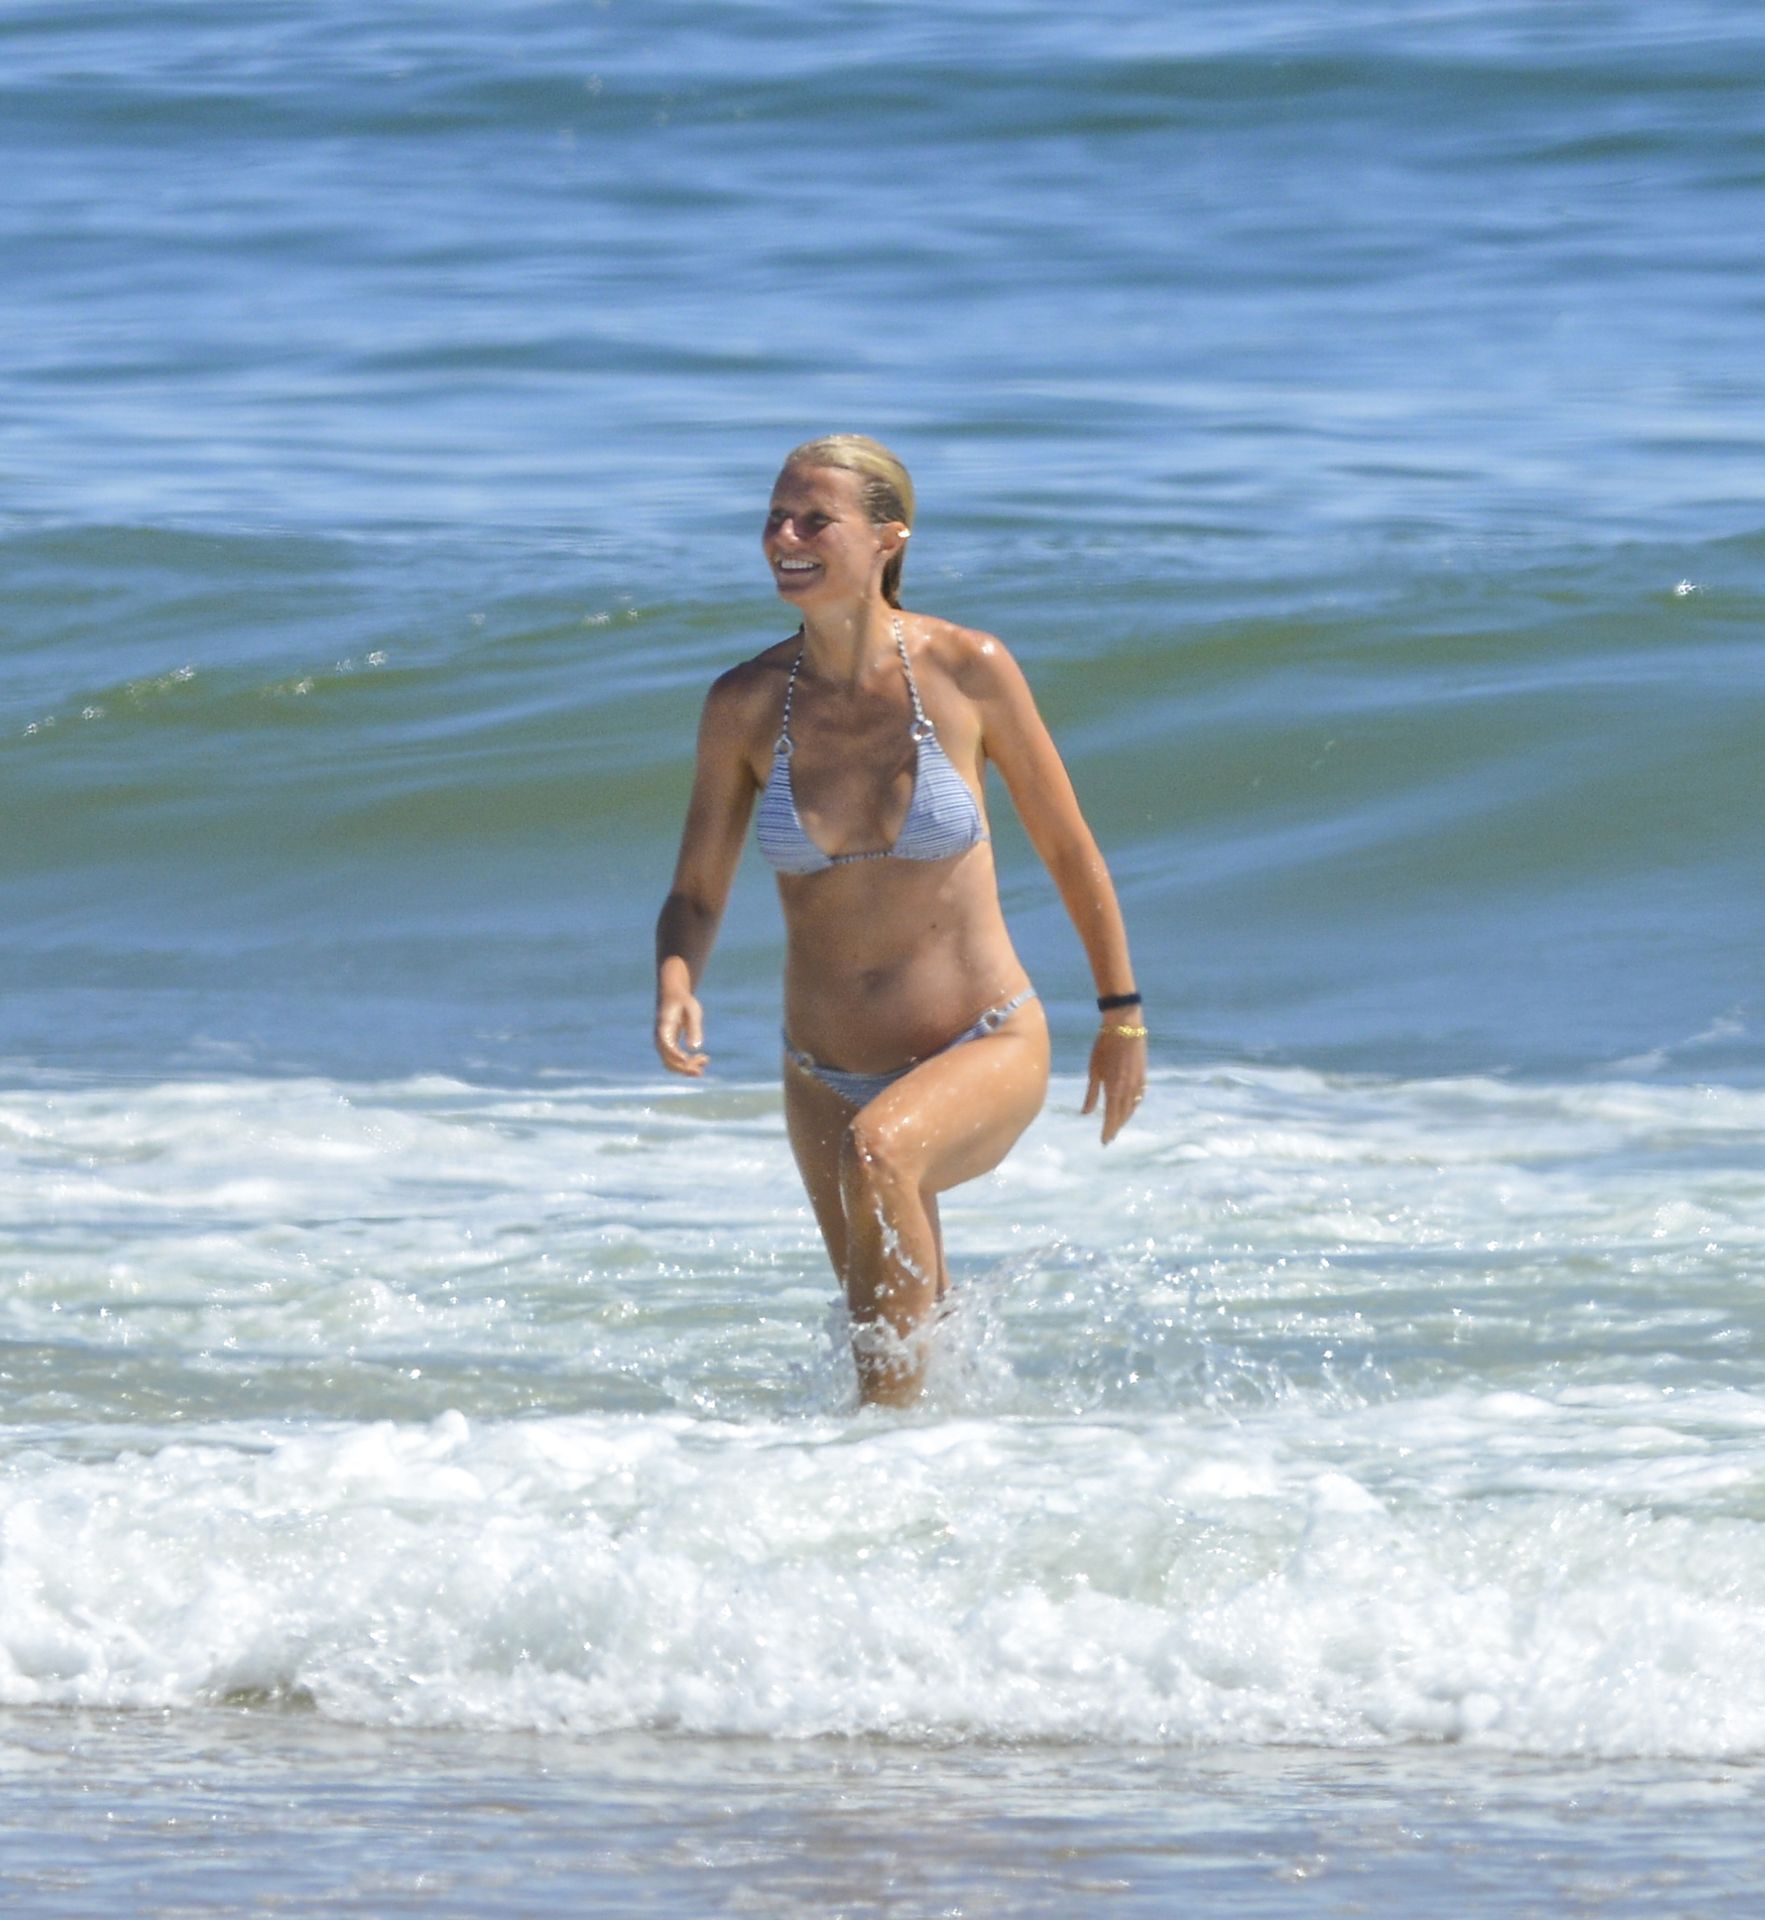 Gwyneth Paltrow Shows Off Her Toned Beach Body on the Beach in The Hamptons (95 Photos)